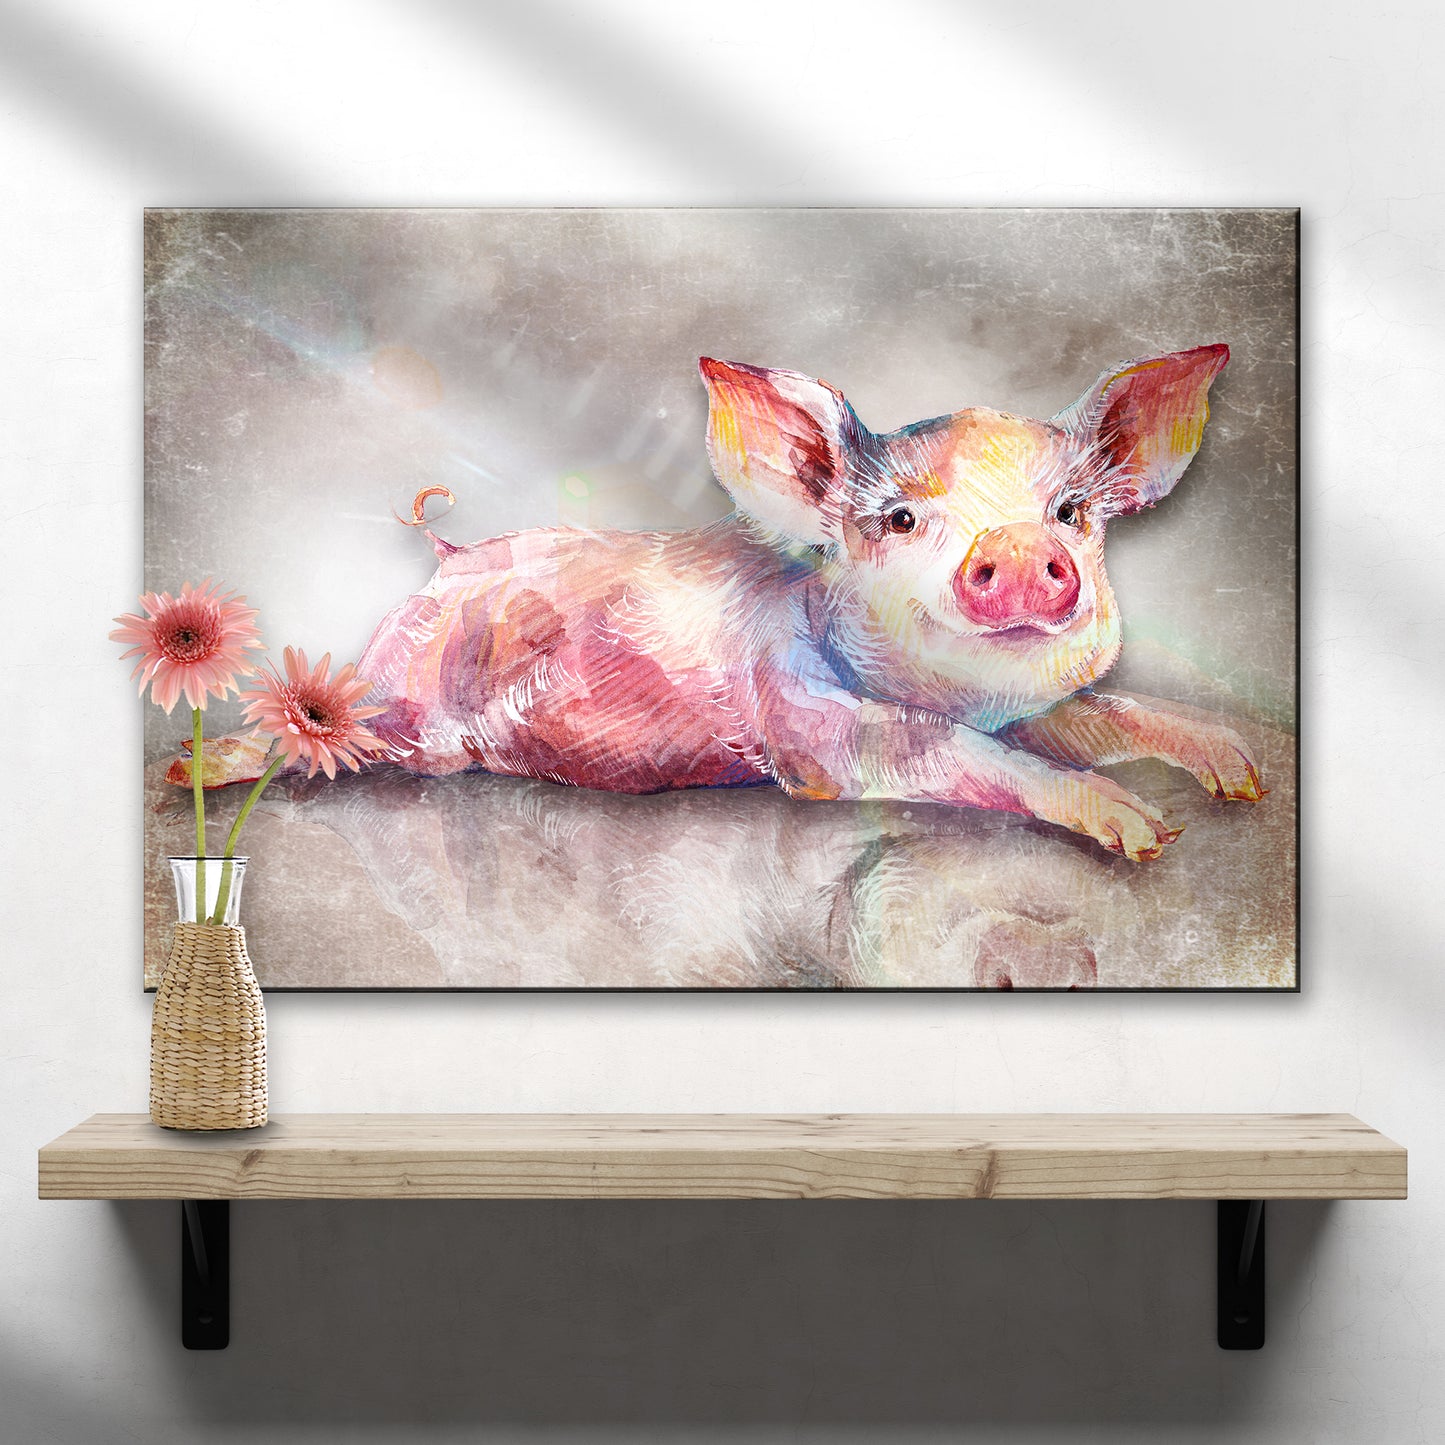 Colorful Spots Lying Pig Canvas Wall Art - Image by Tailored Canvases